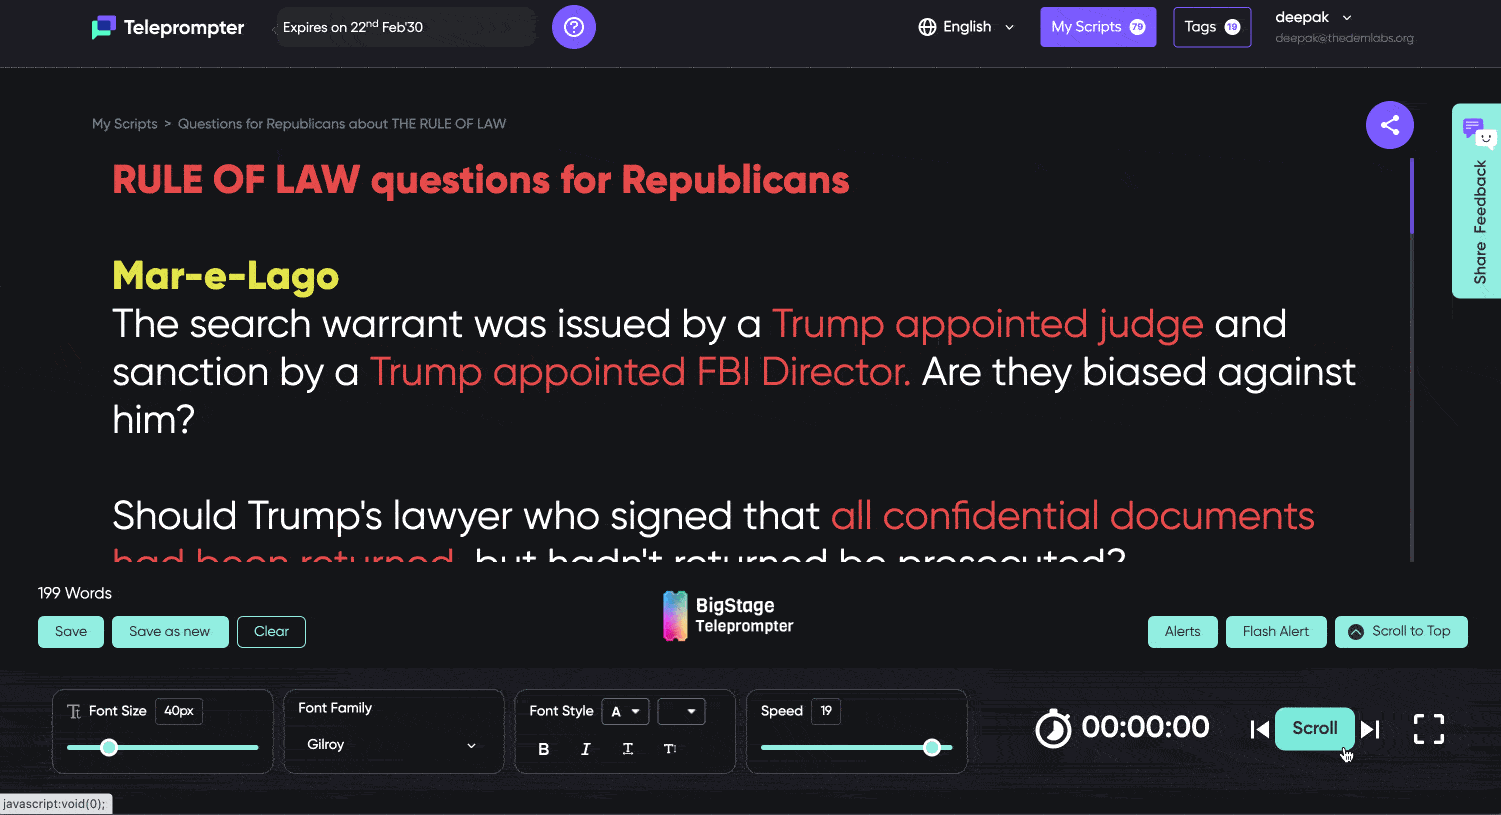 Use the RULE OF LAW script to ask Republicans about putting the lives of law enforcement officials at risk, weakening national security and using double standards for Trump.